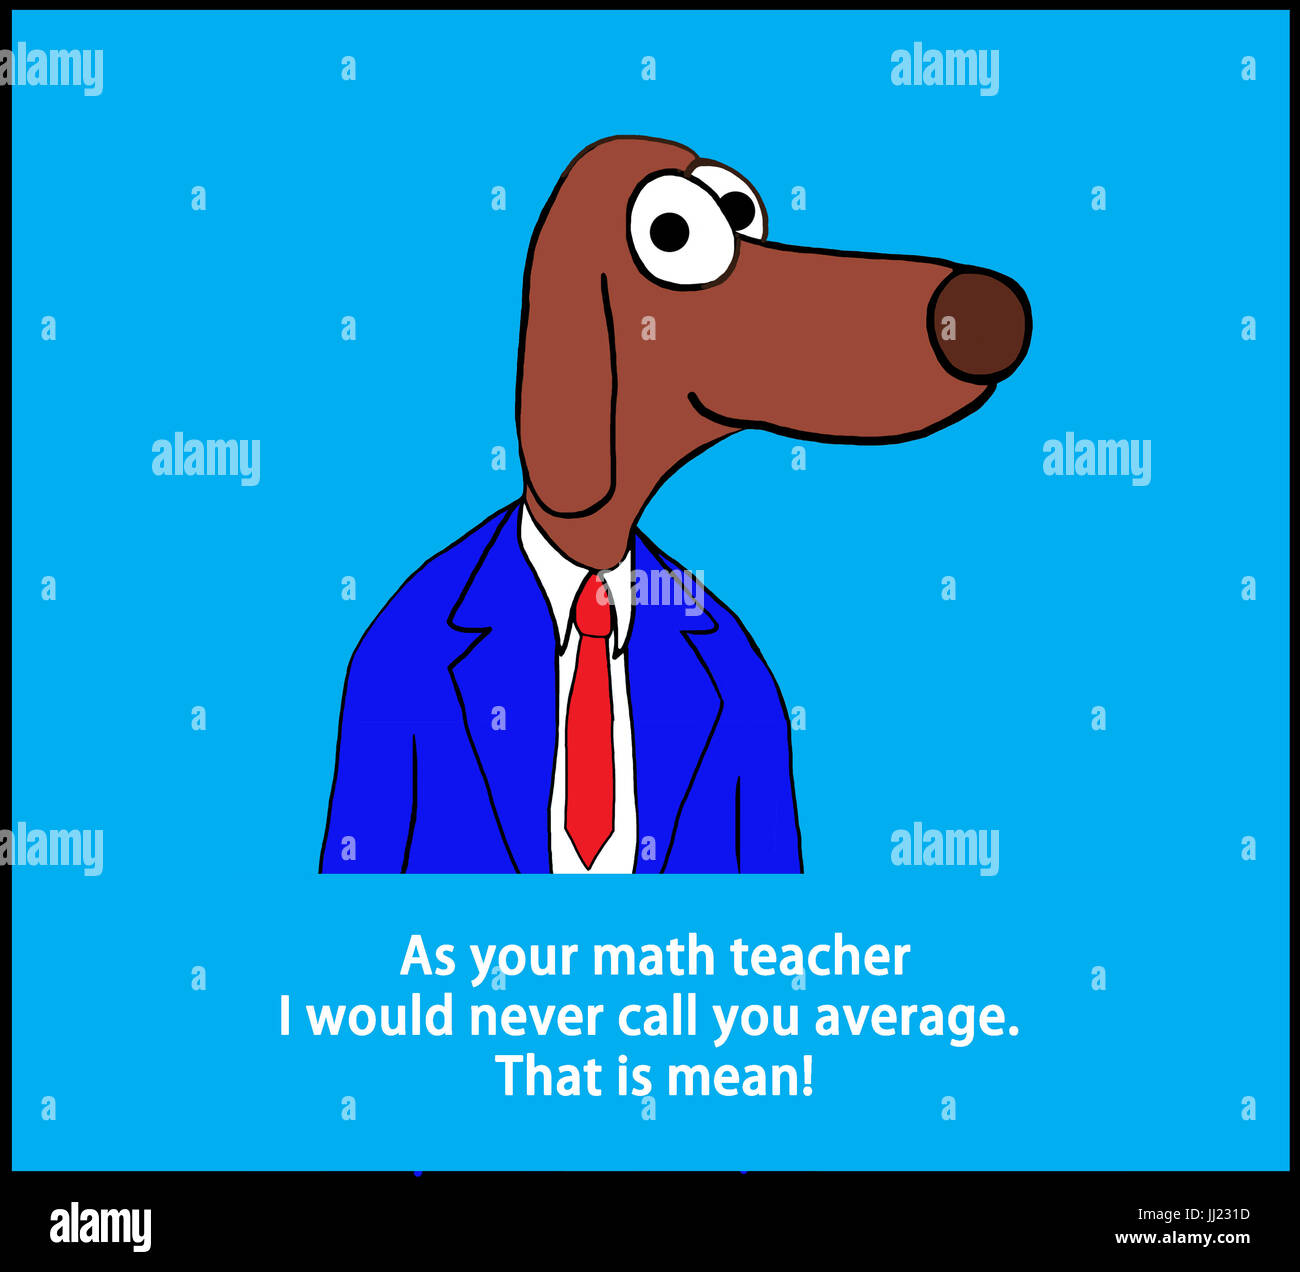 Education cartoon illustration of a teacher dog and a pun about math. Stock Photo